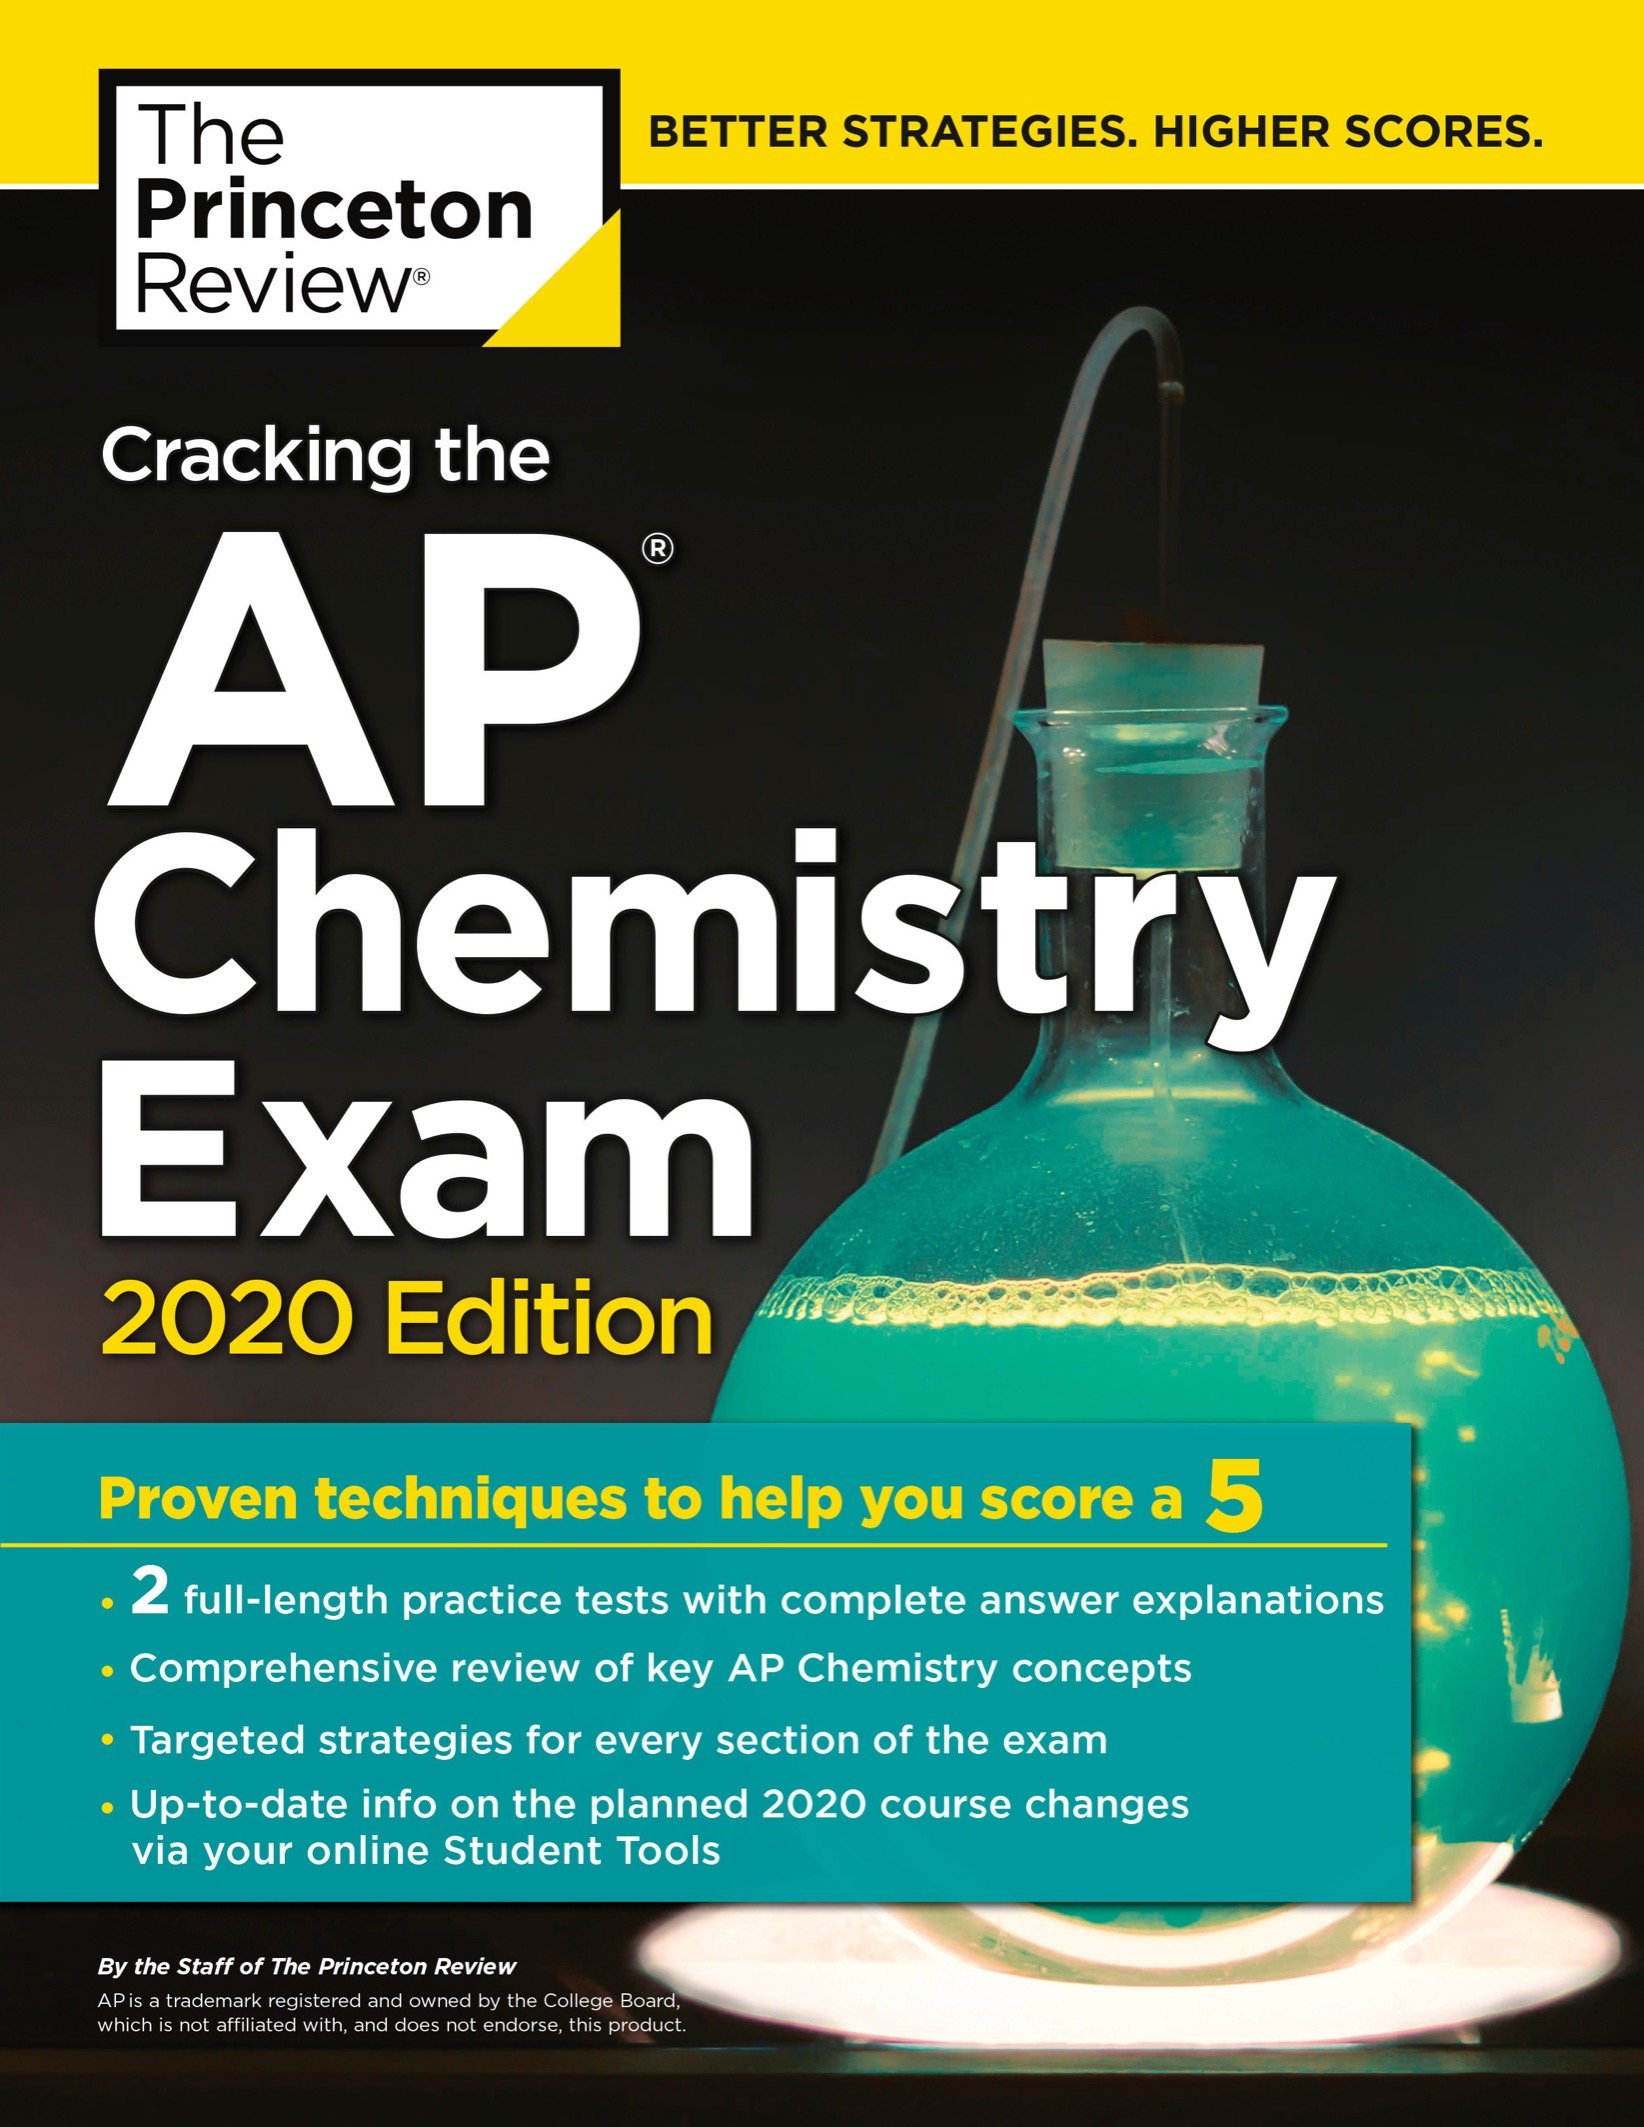 download-cracking-the-ap-chemistry-exam-2020-edition-practice-tests-proven-techniques-to